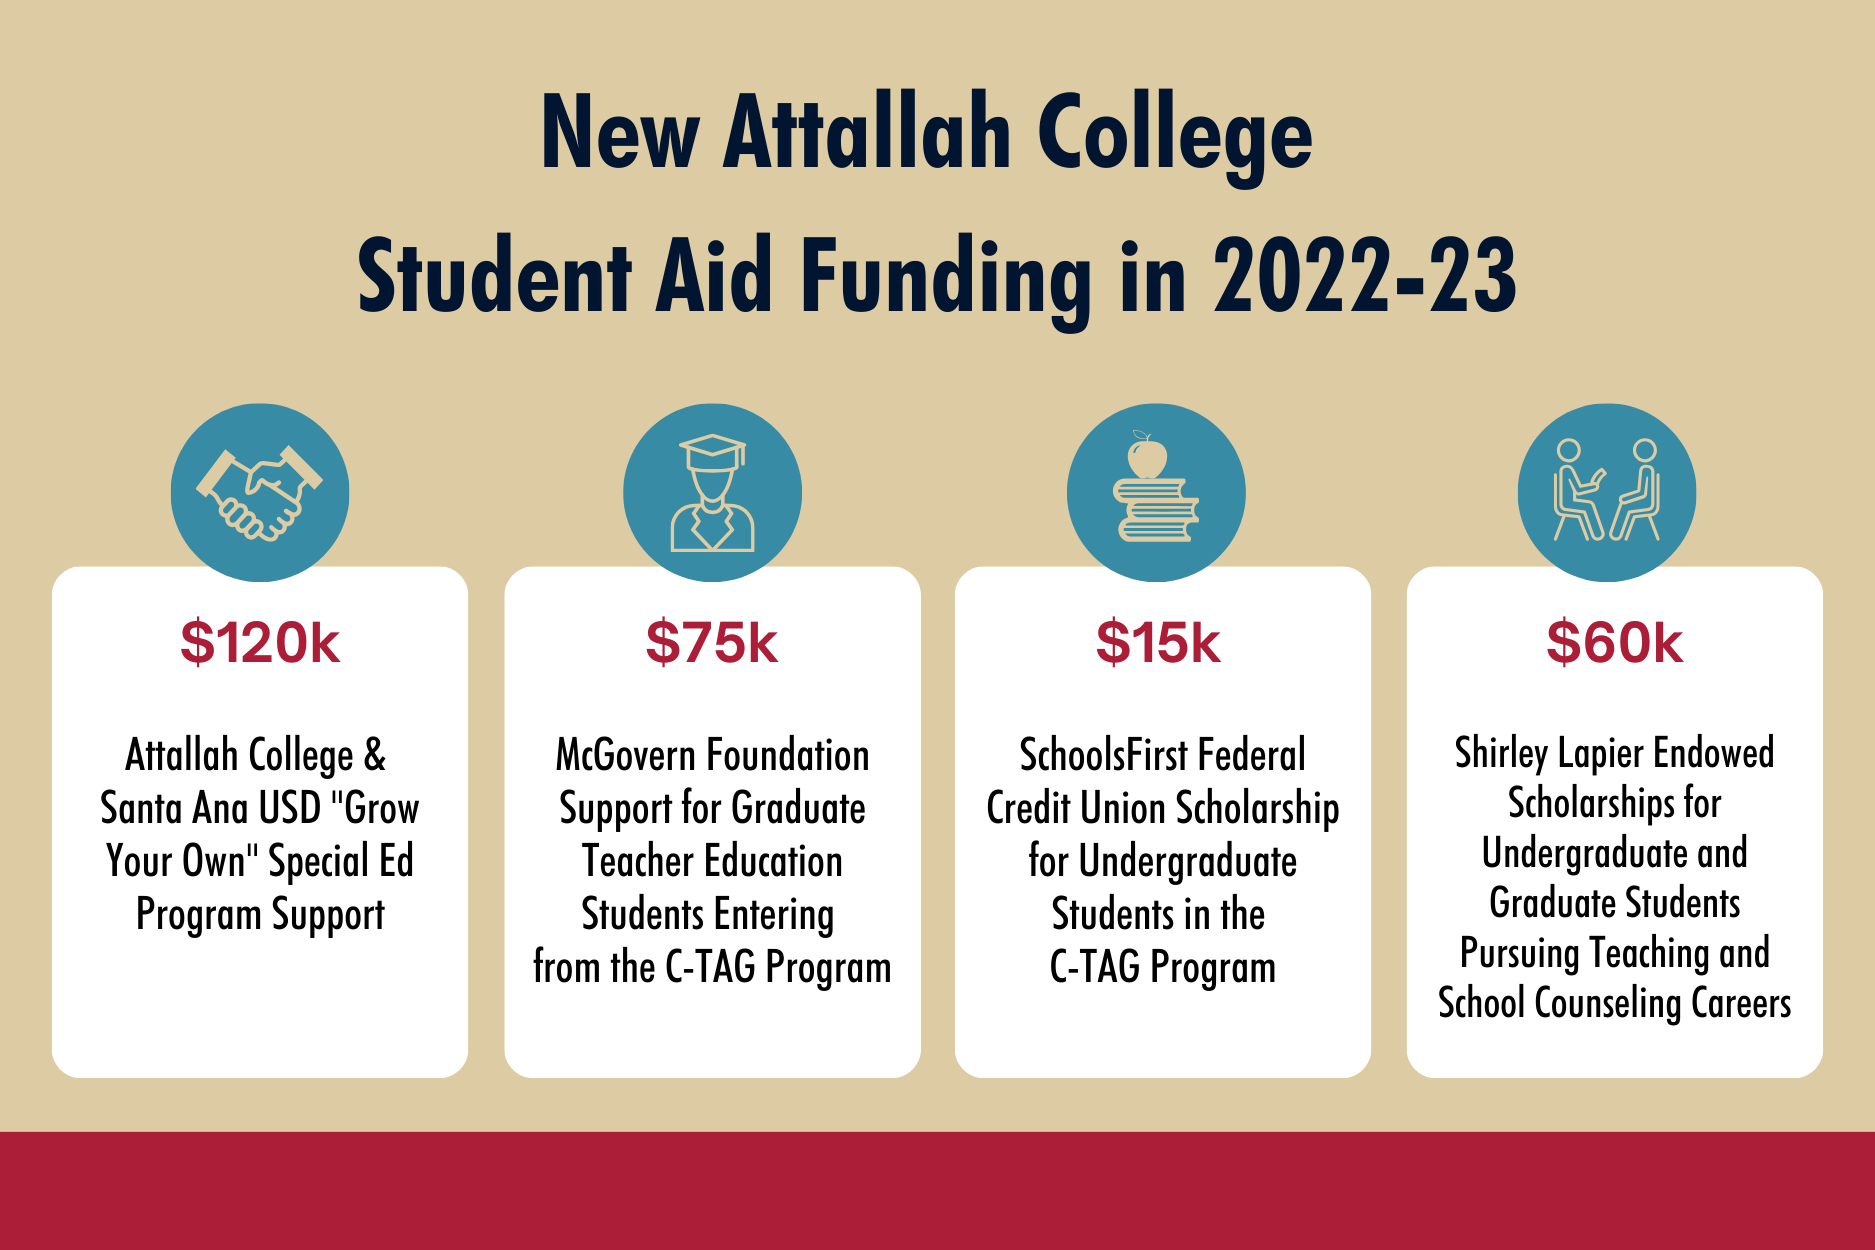 $270k in New Attallah College Student Aid Funding 